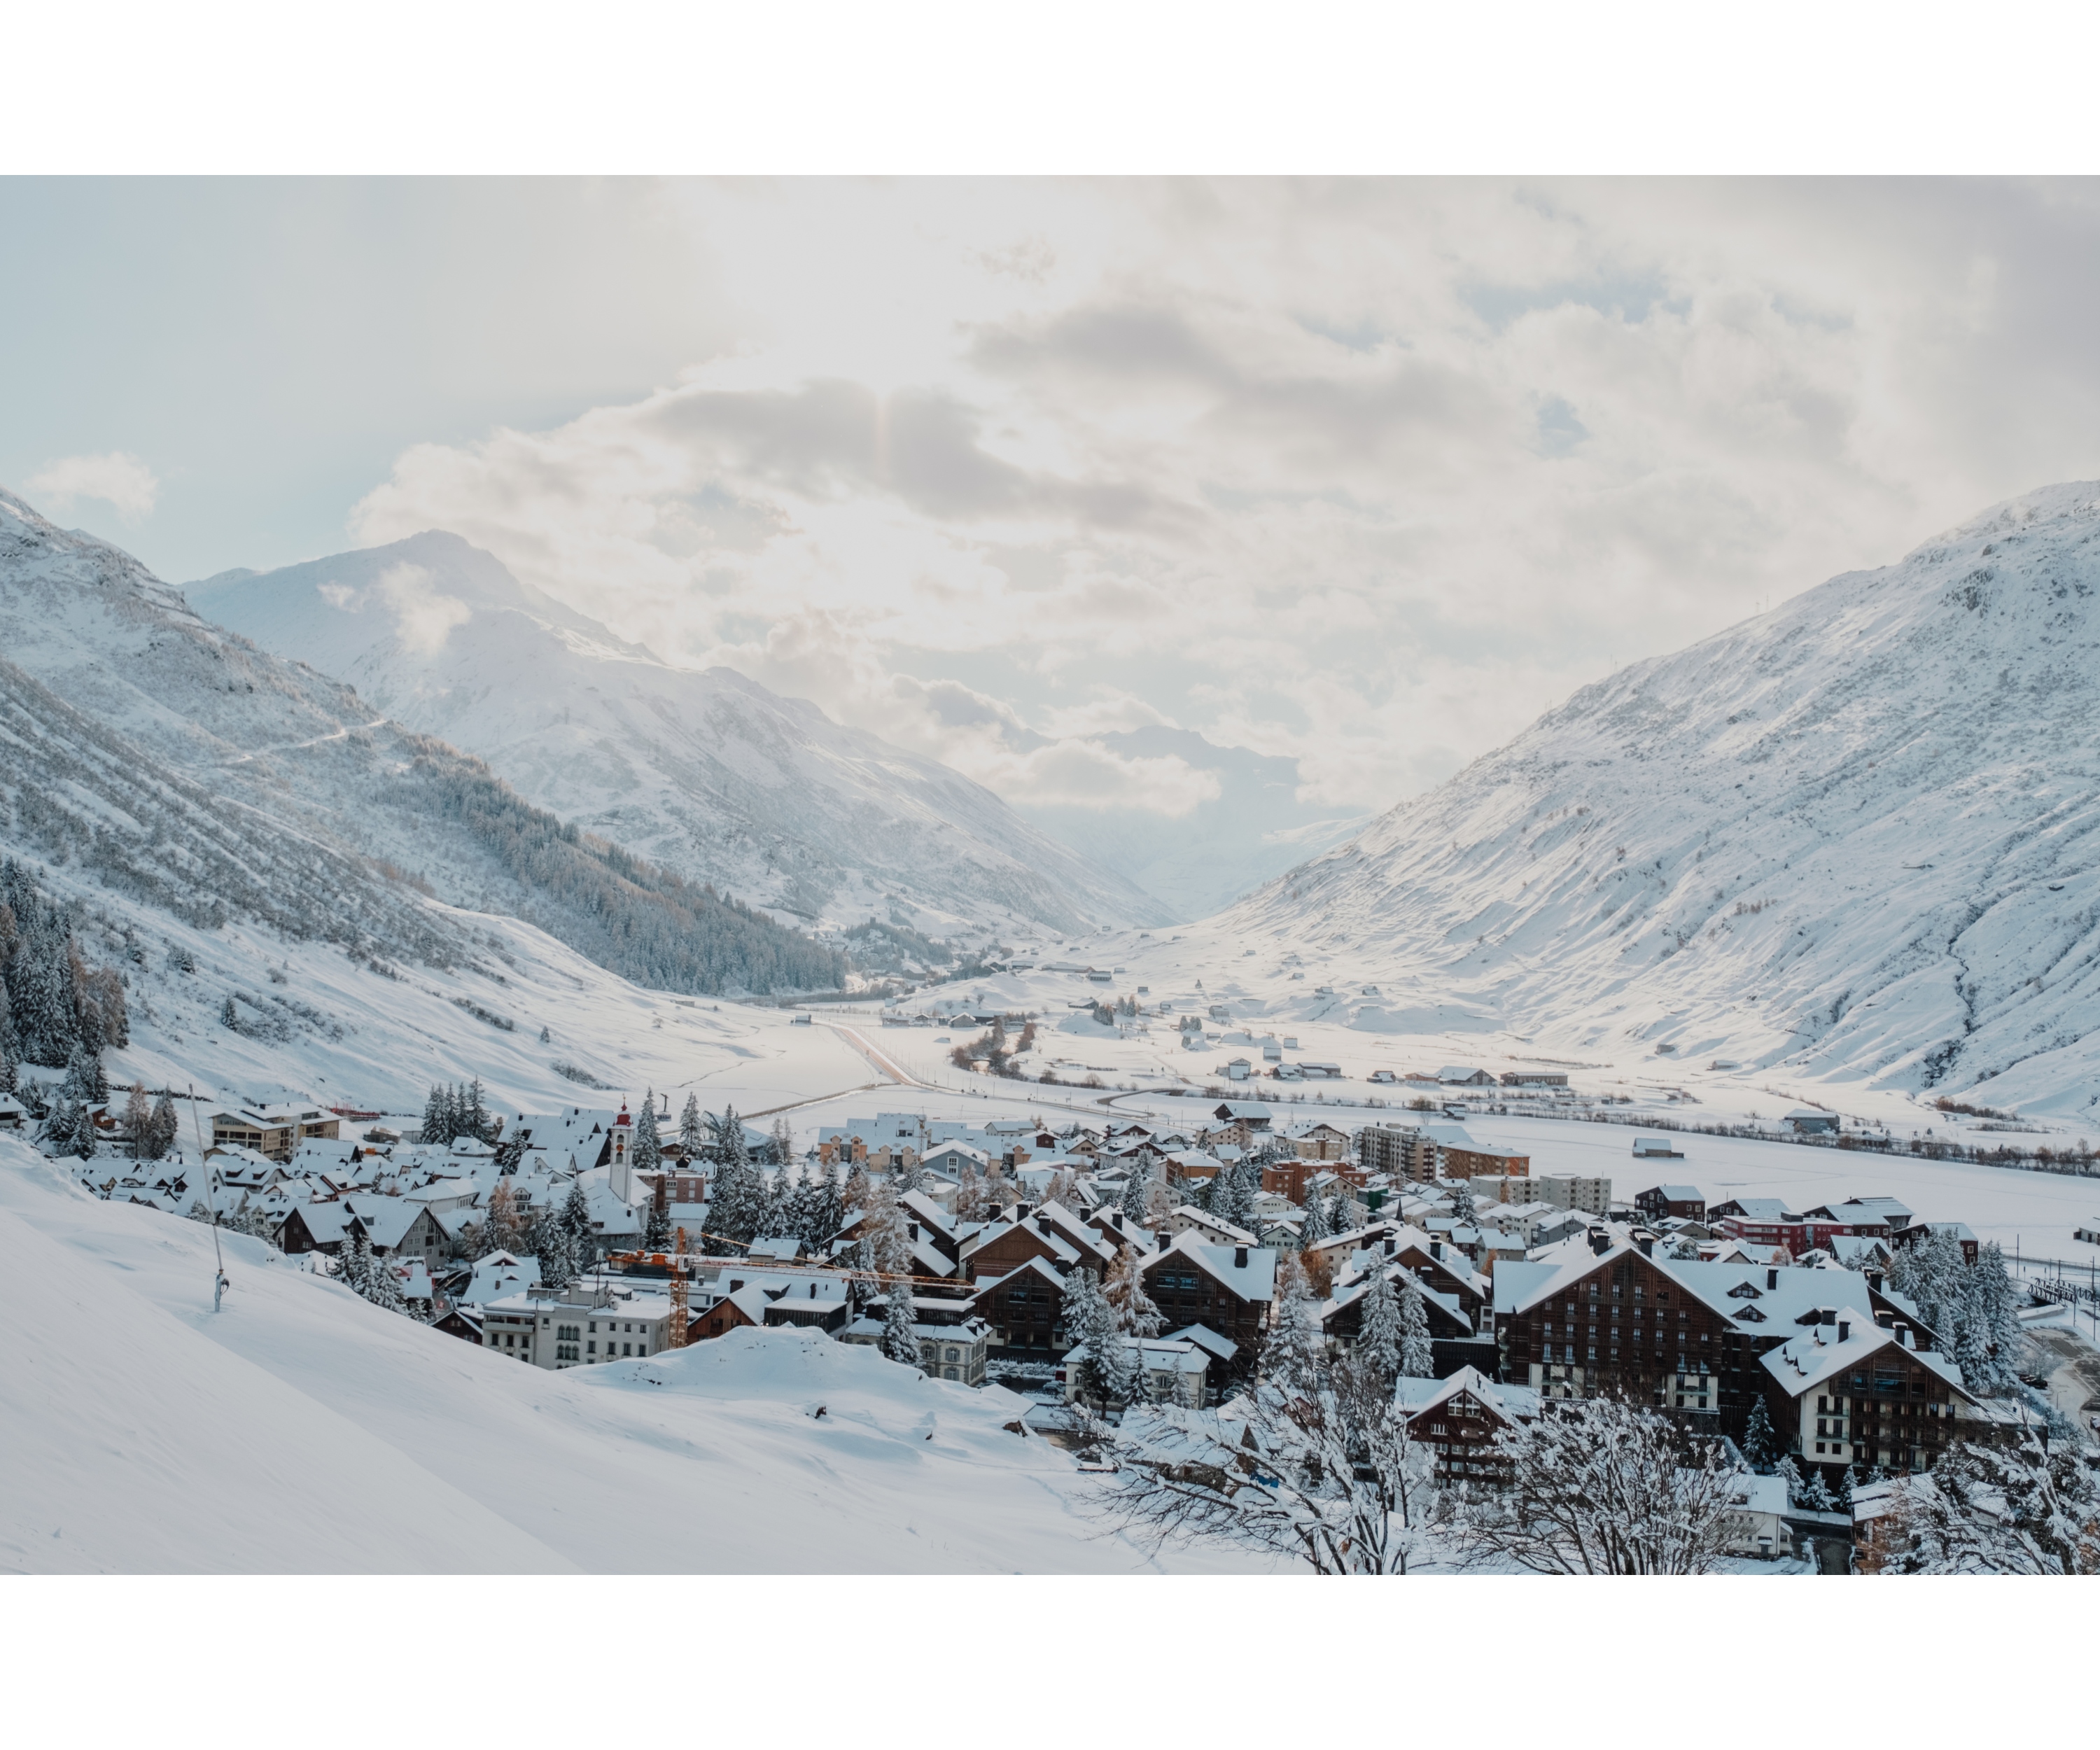 Photo over Andermatt at sunrise. The sky is slightly cloudy and the mountains in the background and the whole landscape is covered with snow.